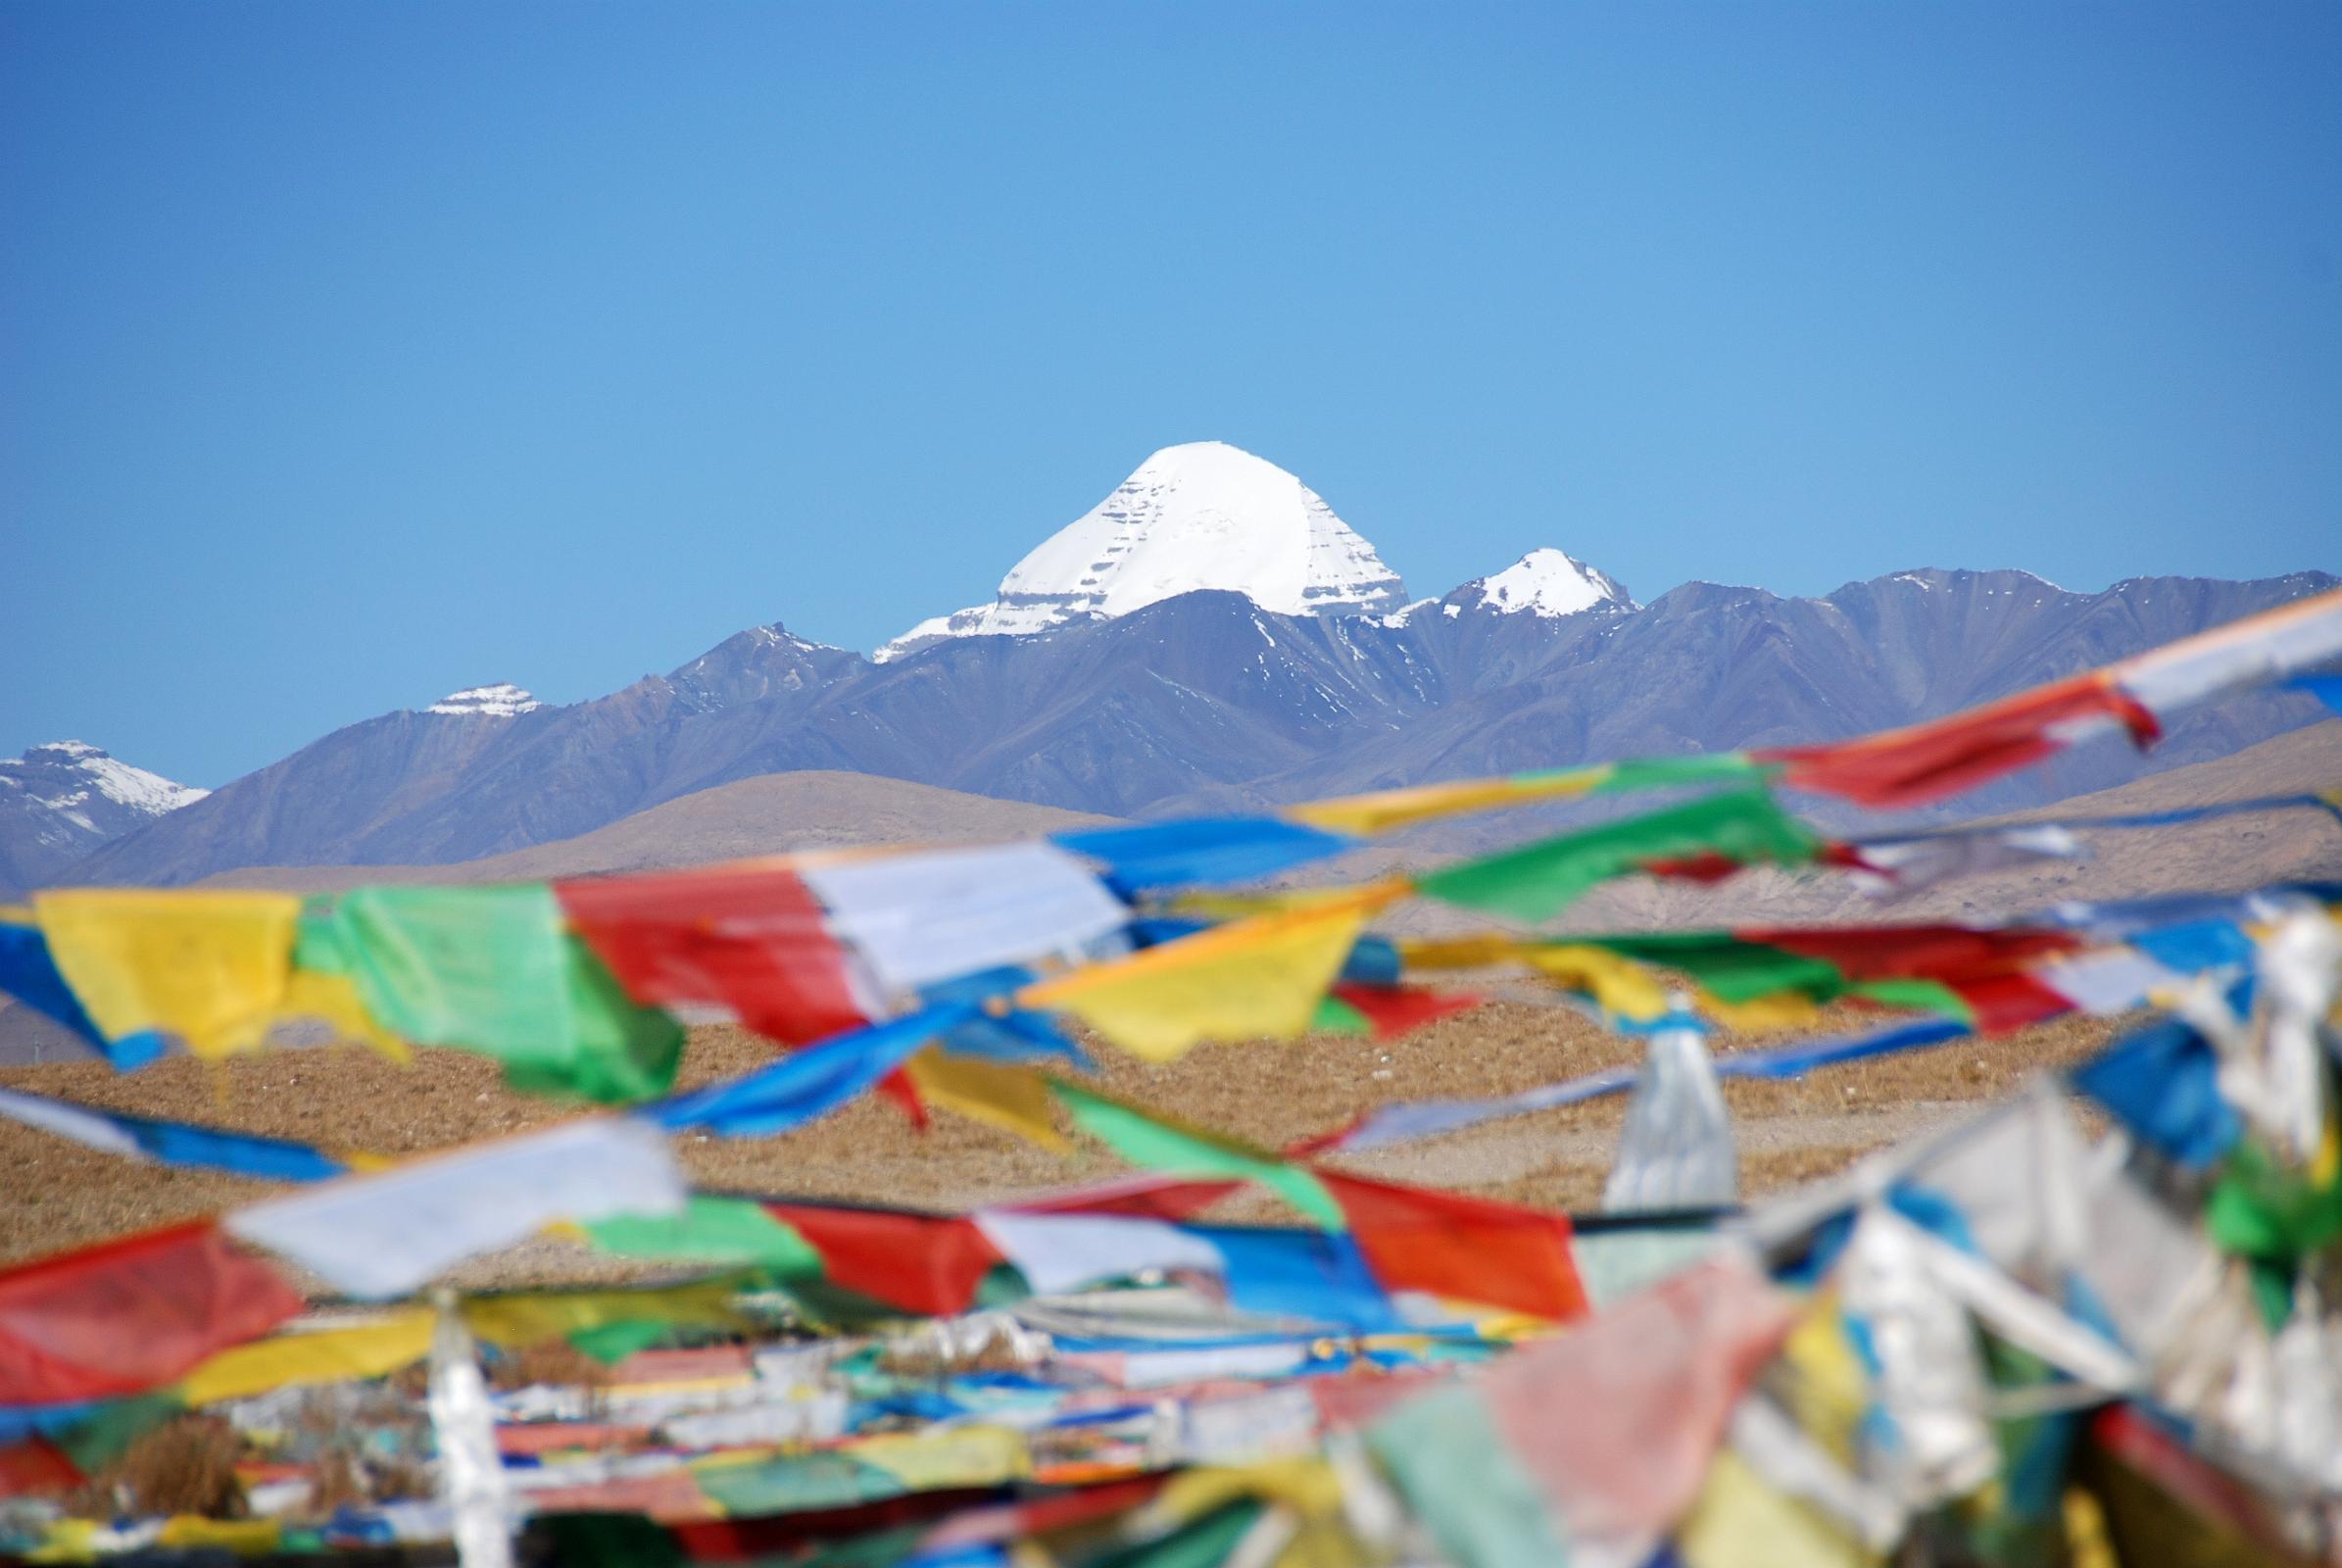 02 First View Of Mount Kailash With Prayer Flags The first view of Mount Kailash occurs after cresting a small hill.